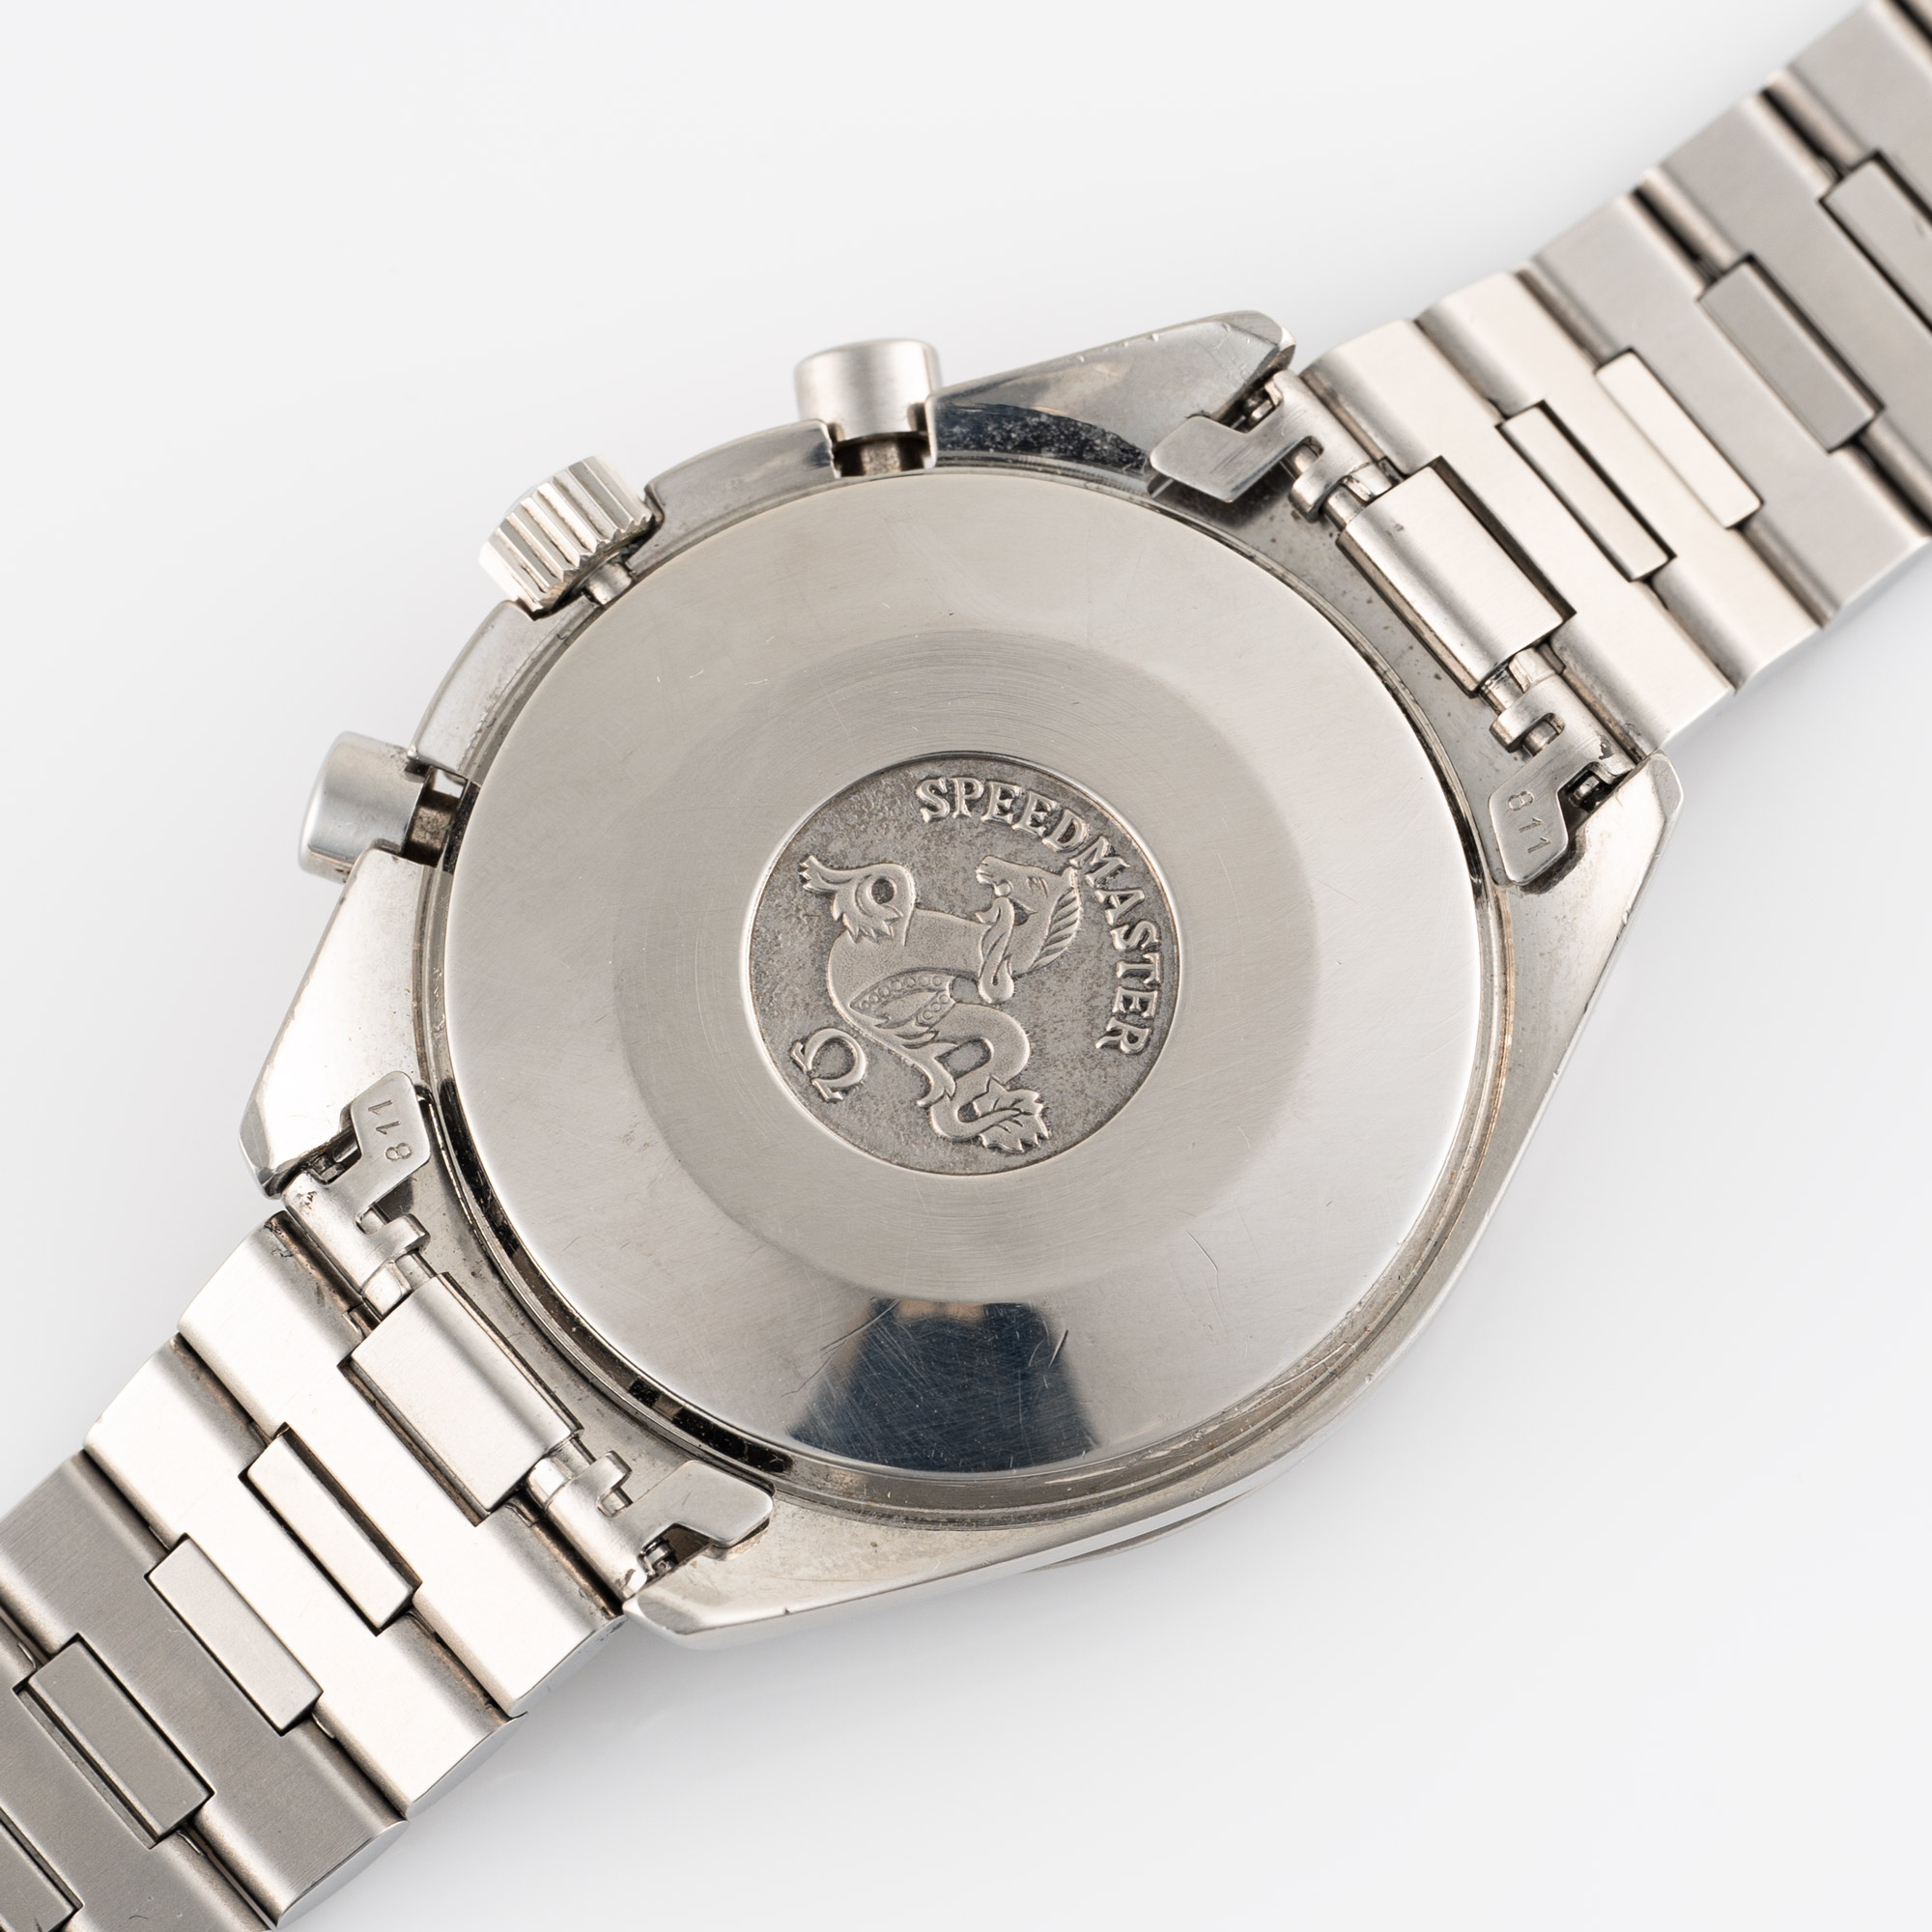 A GENTLEMAN'S SIZE STAINLESS STEEL OMEGA SPEEDMASTER REDUCED AUTOMATIC CHRONOGRAPH BRACELET WATCH - Image 7 of 8